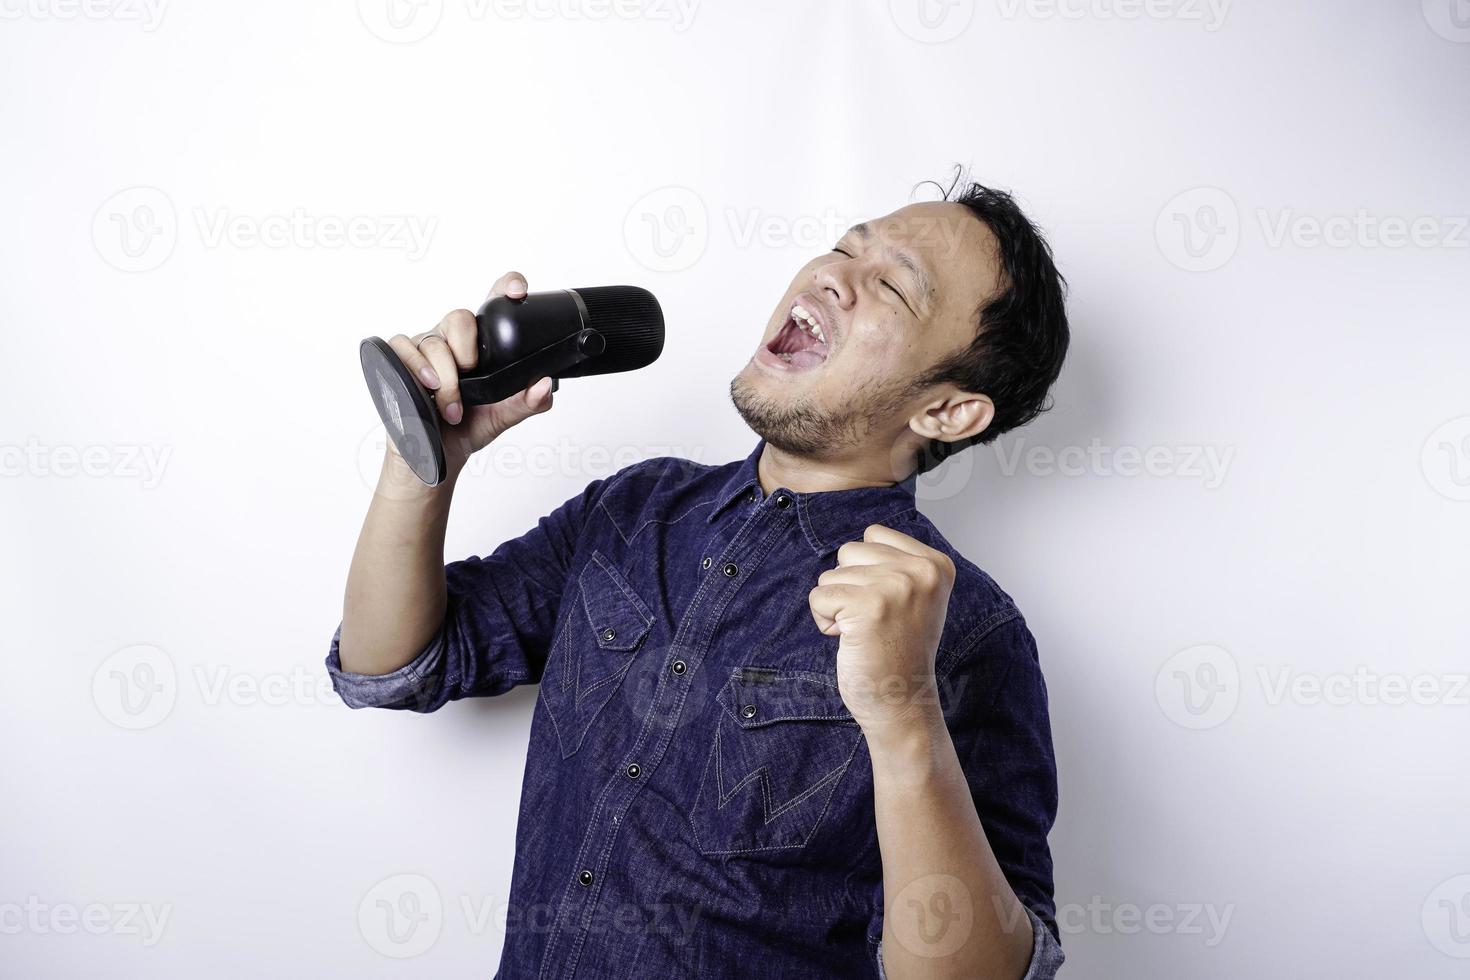 Portrait of carefree Asian man, having fun karaoke, singing in microphone while standing over white background photo